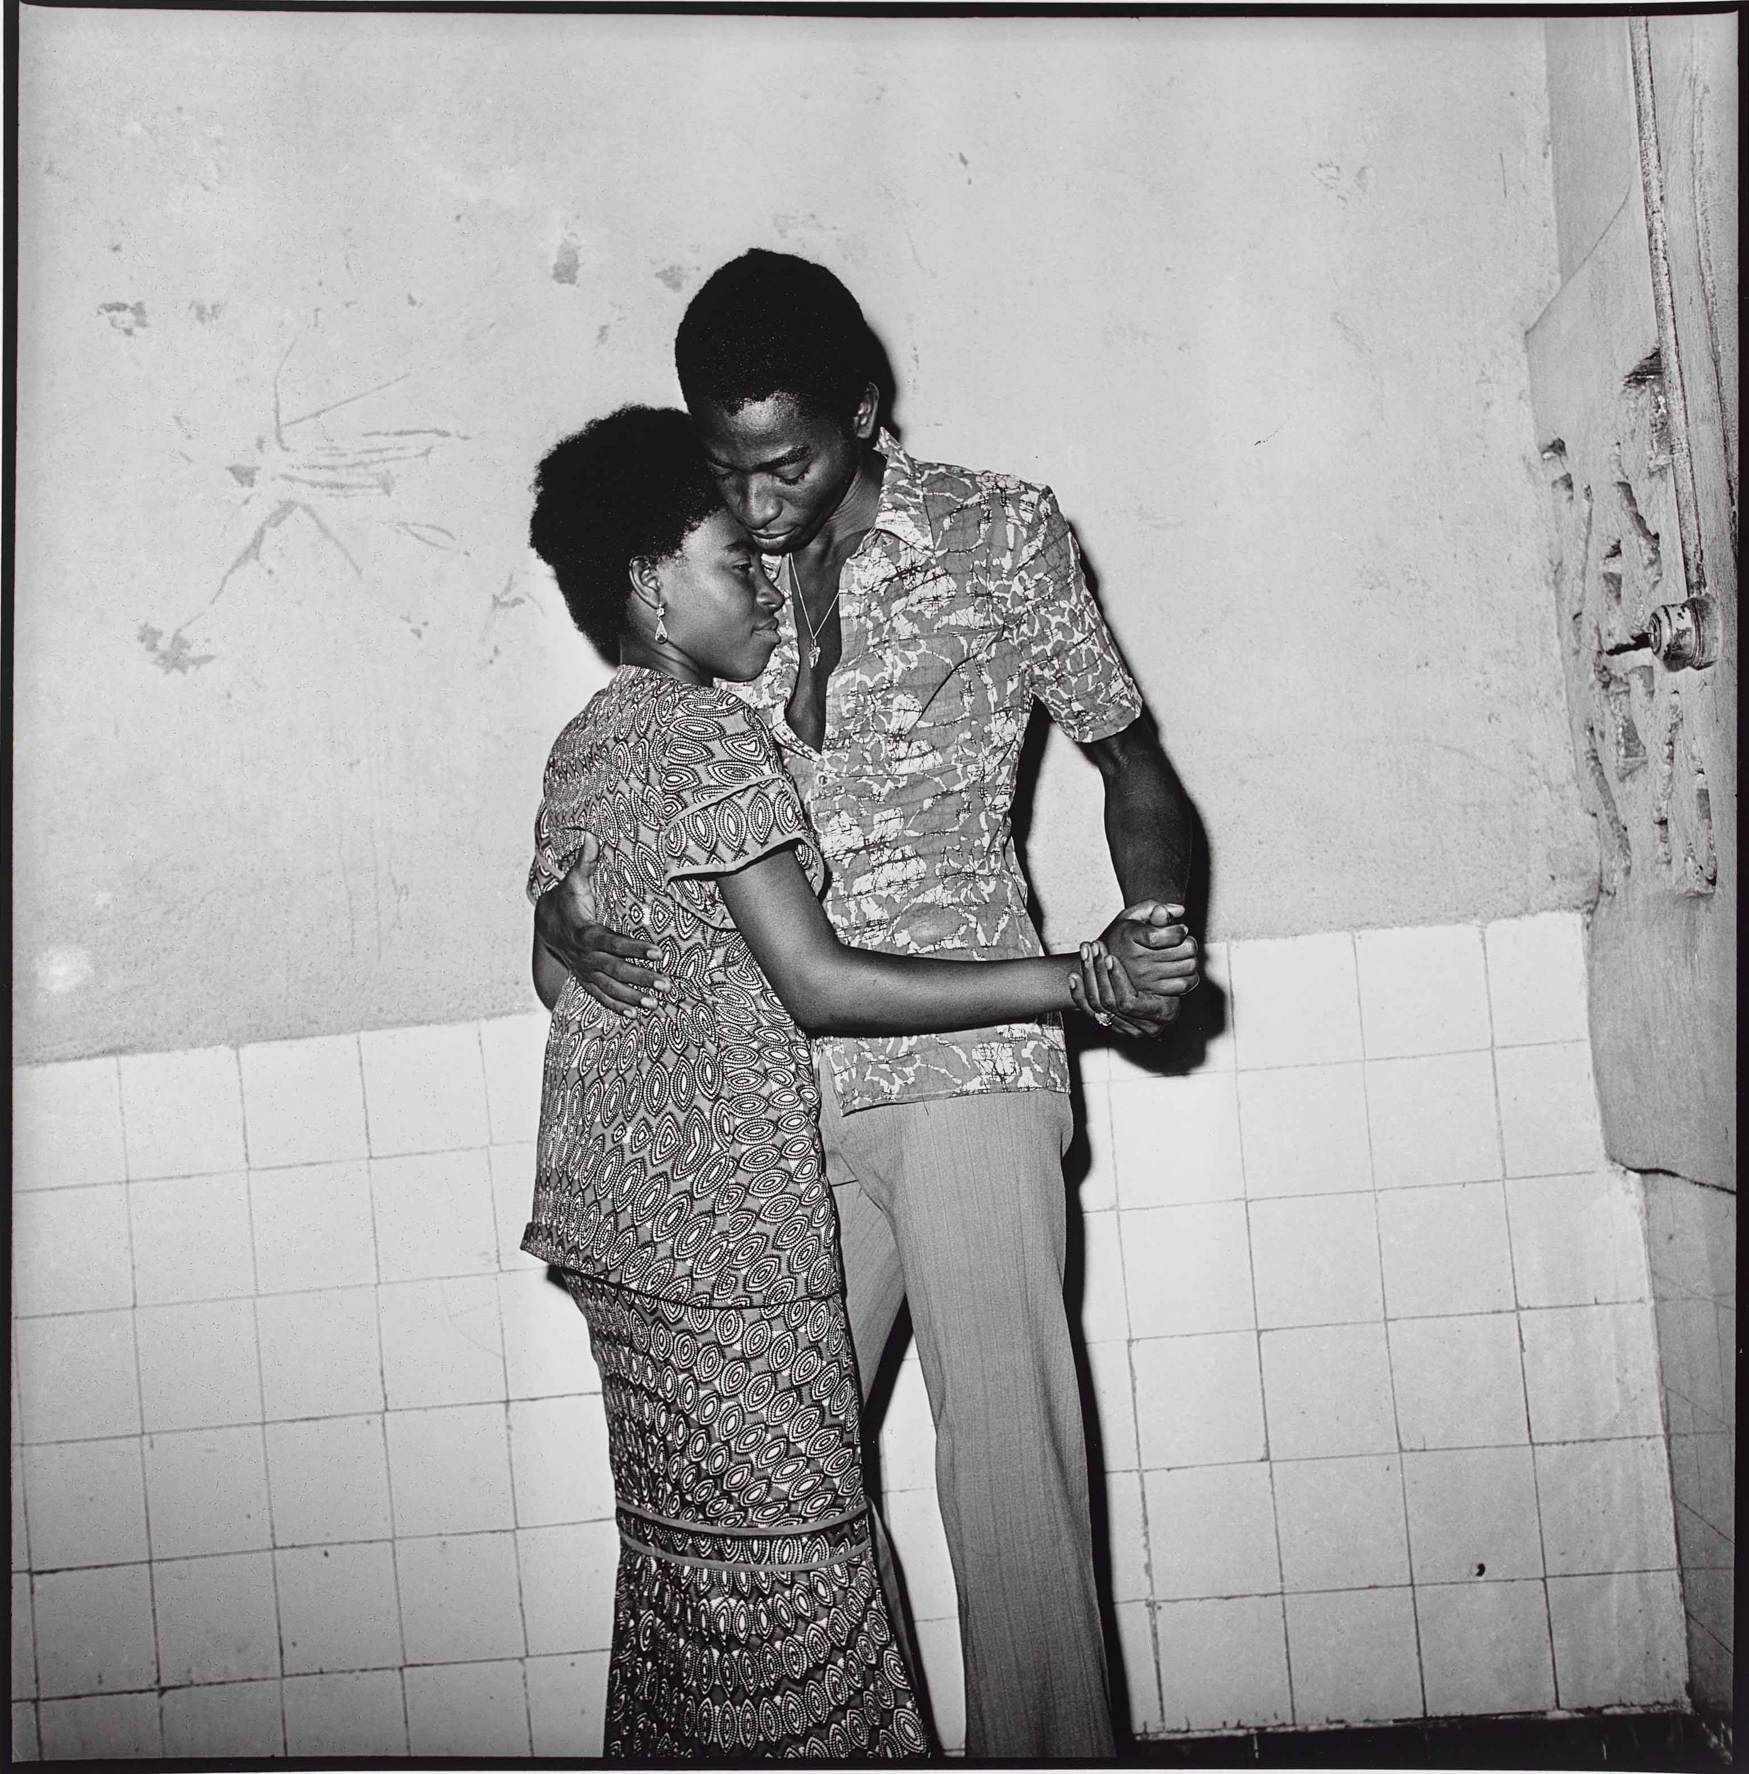 Paul Kodjo, Untitled, 1970s. Gelatin silver print, 50 x 40 cm. Art Gallery of Ontario, Purchase, with funds from the Photography Curatorial Committee, 2020. © Paul Kodjo, courtesy Les Rencontres du Sud 2019/2330.